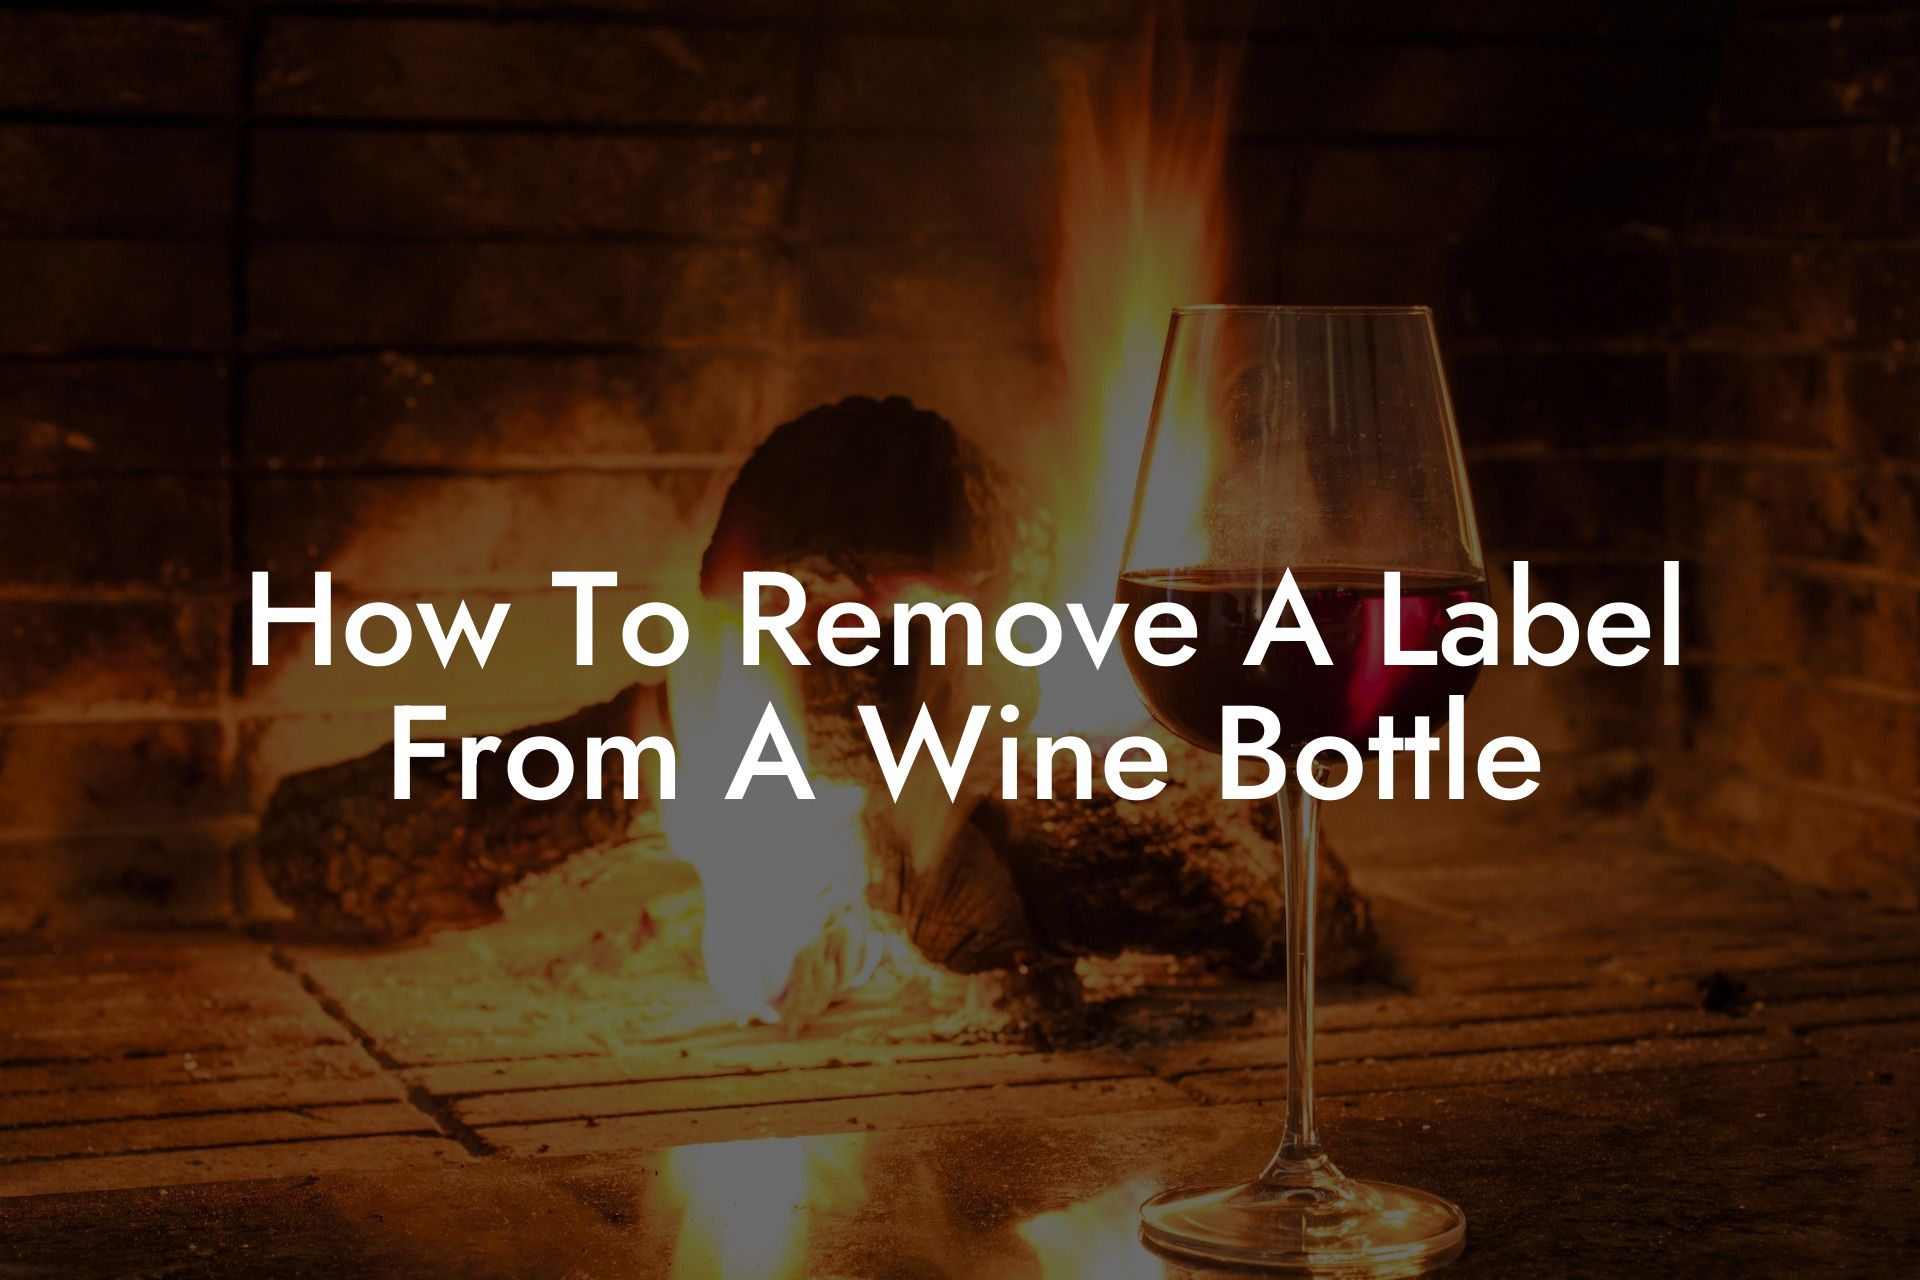 How To Remove A Label From A Wine Bottle